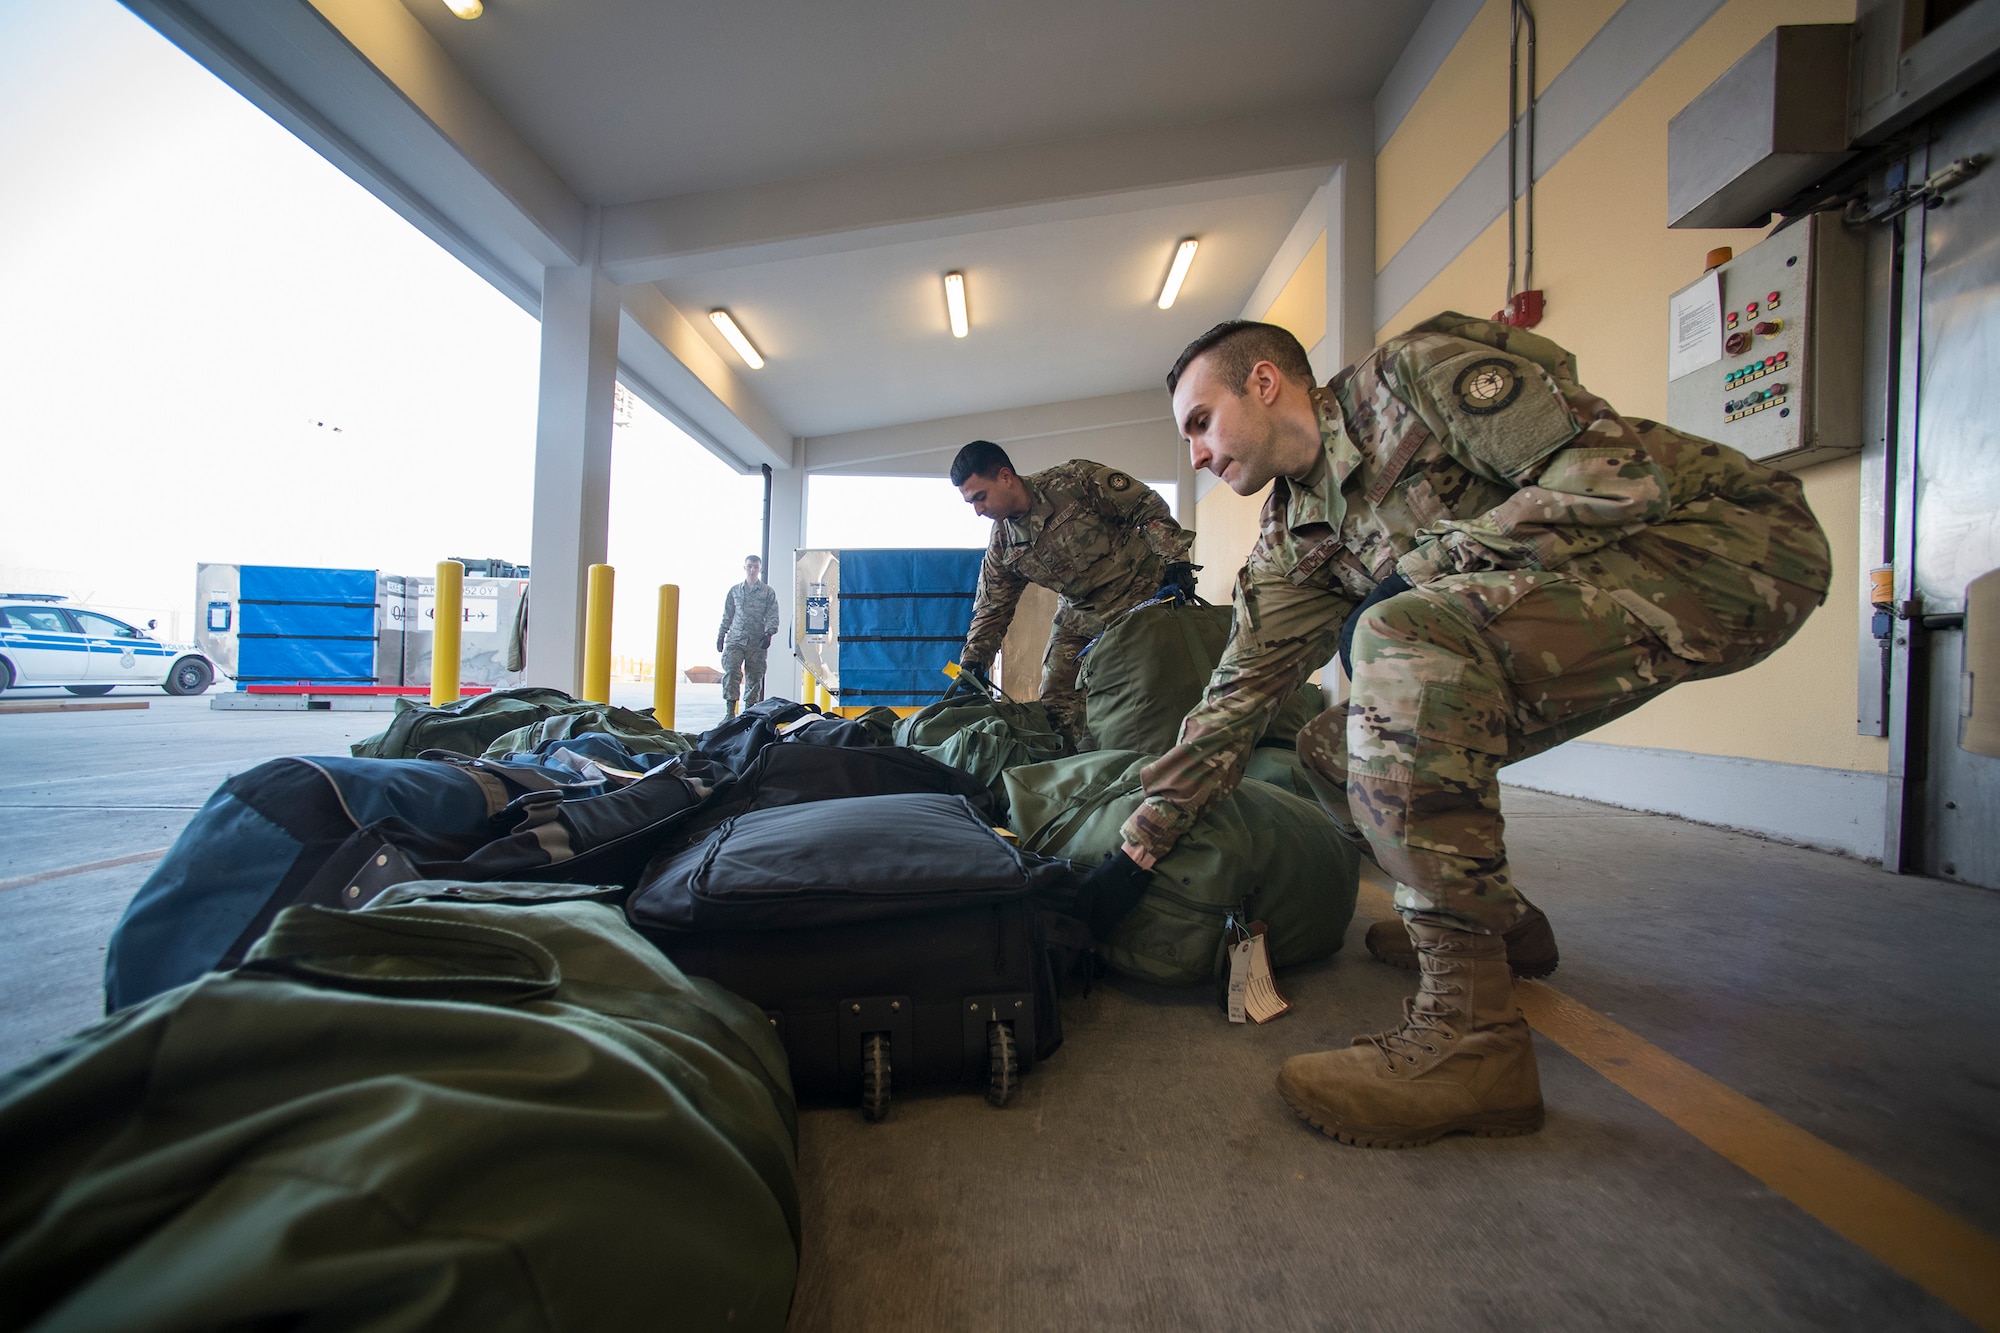 Airmen from the 728th Air Mobility Squadron load luggage March 19, 2019, at Incirlik Air Base, Turkey. The squadron serves as the 39th Air Base Wing’s aerial port and supports transient Department of Defense and allied aircraft. (U.S. Air Force photo by Staff Sgt. Ceaira Tinsley)